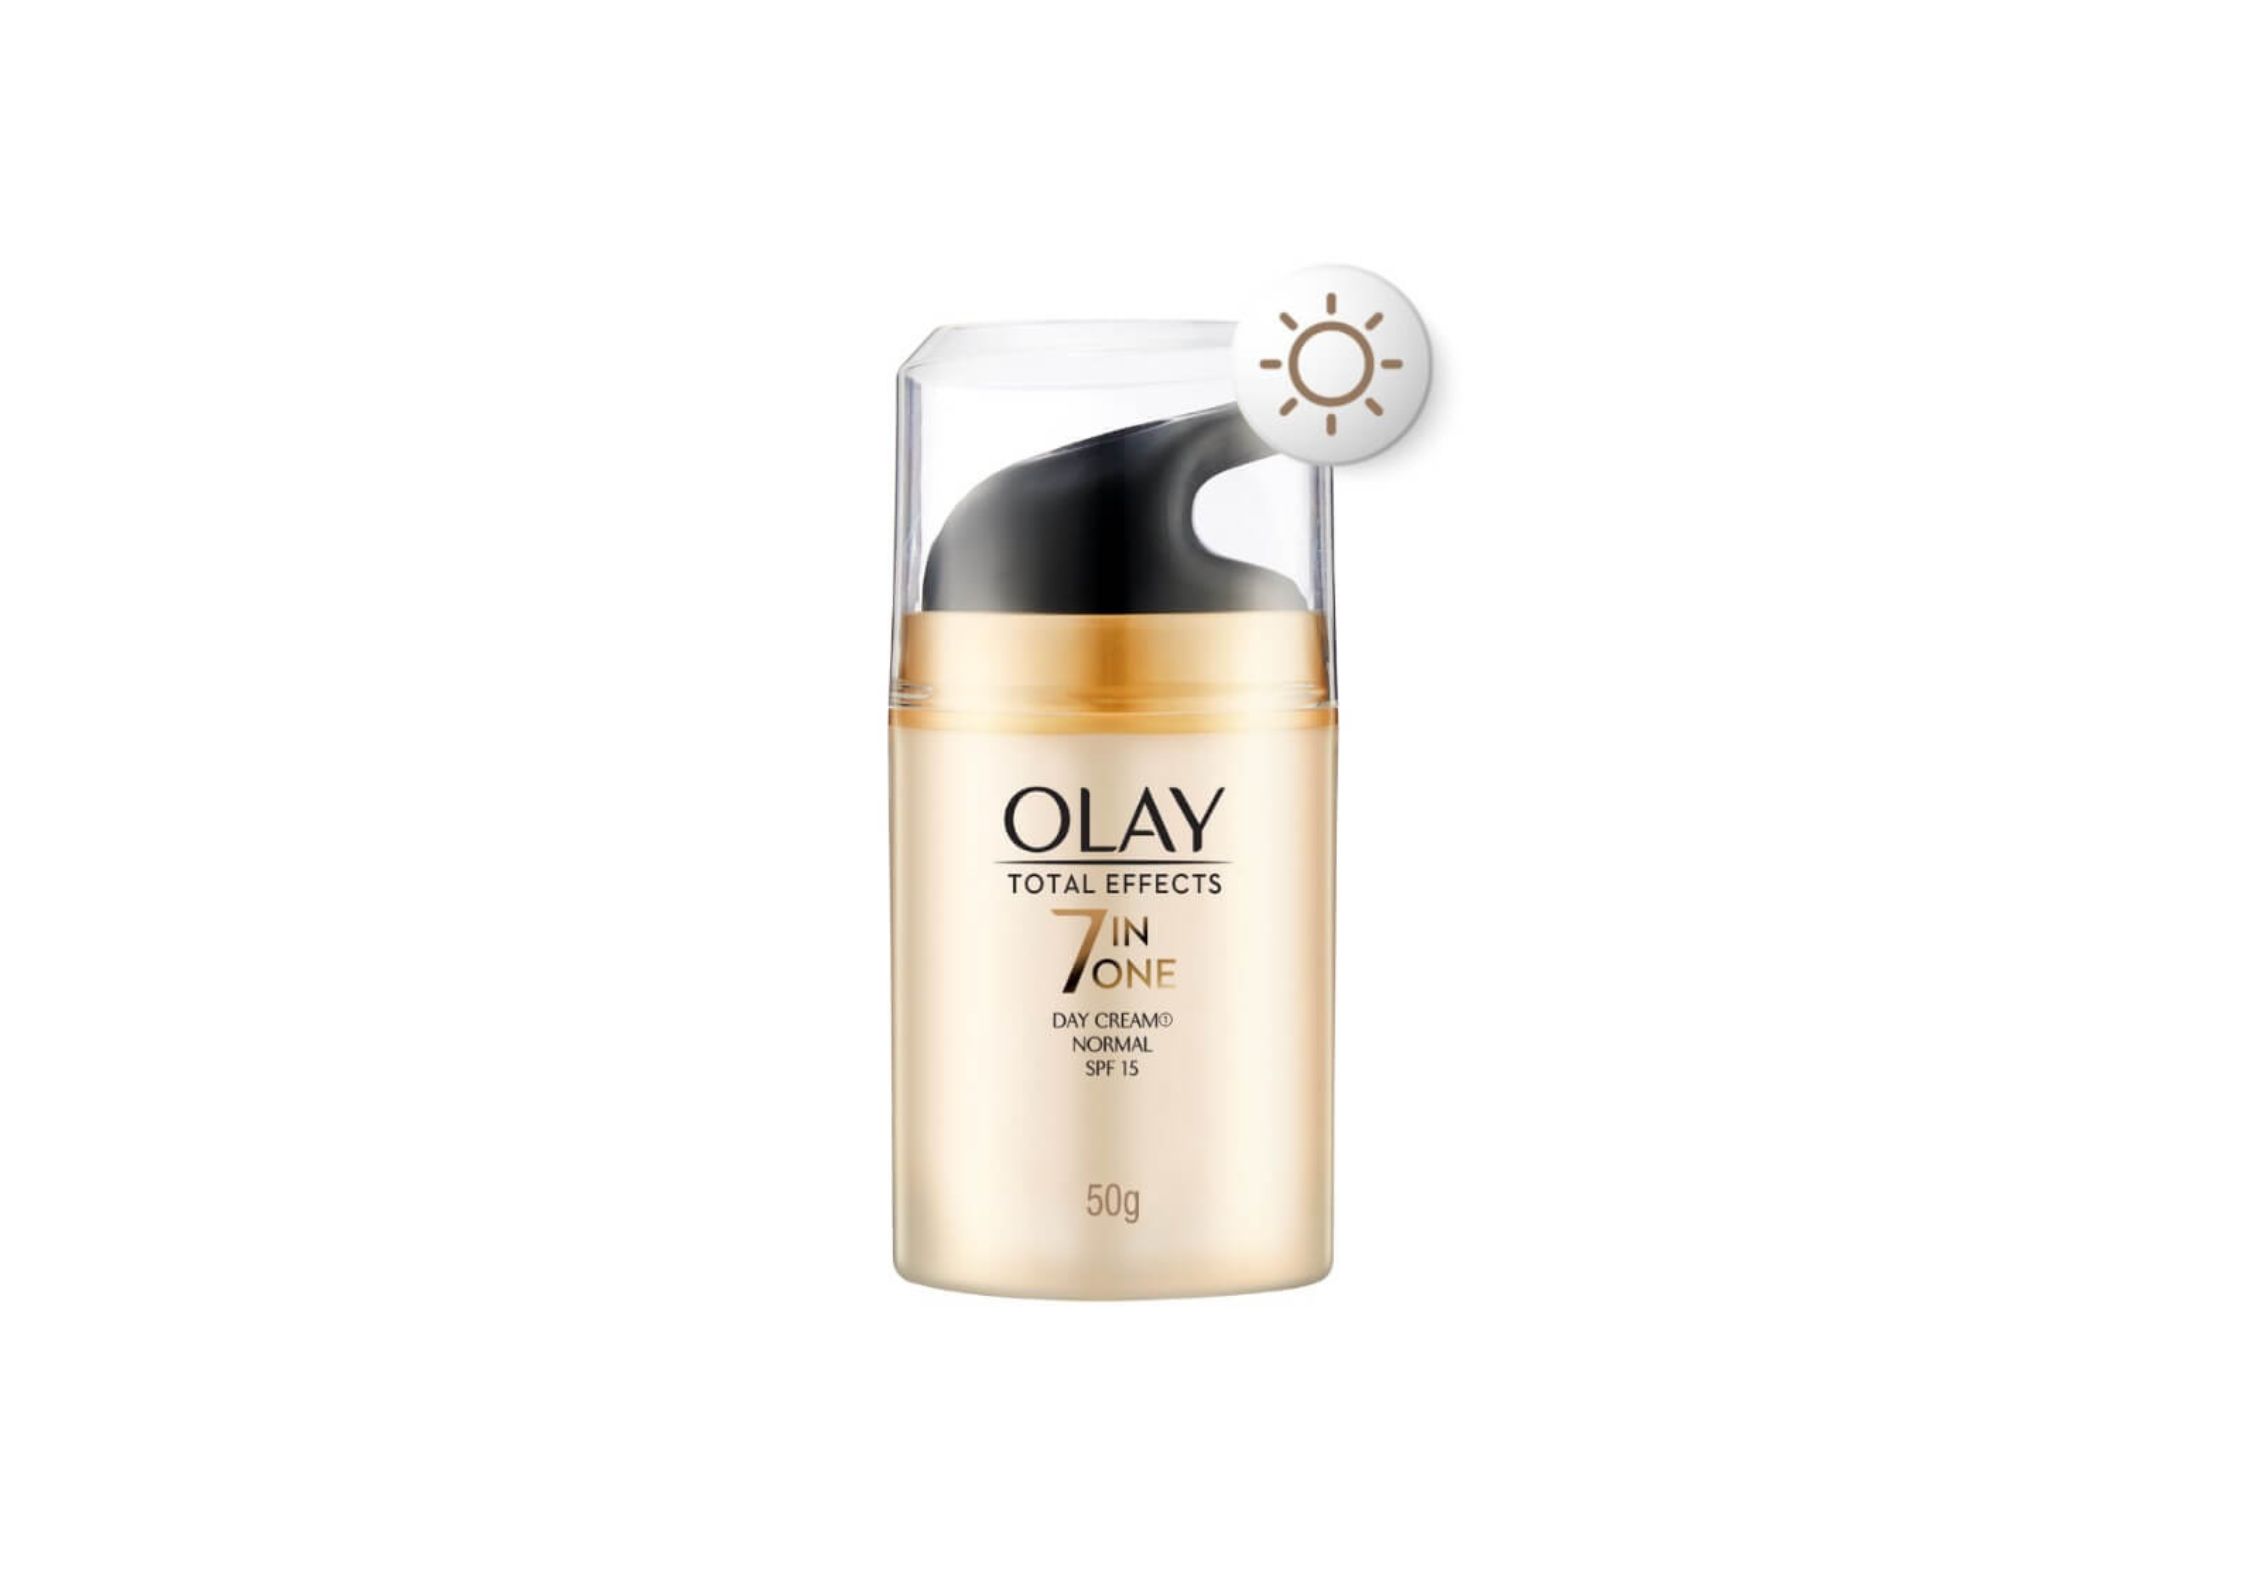 Kem dưỡng Olay Total Effects 7 in One Day Cream Normal SPF 15 (Ảnh: Internet).